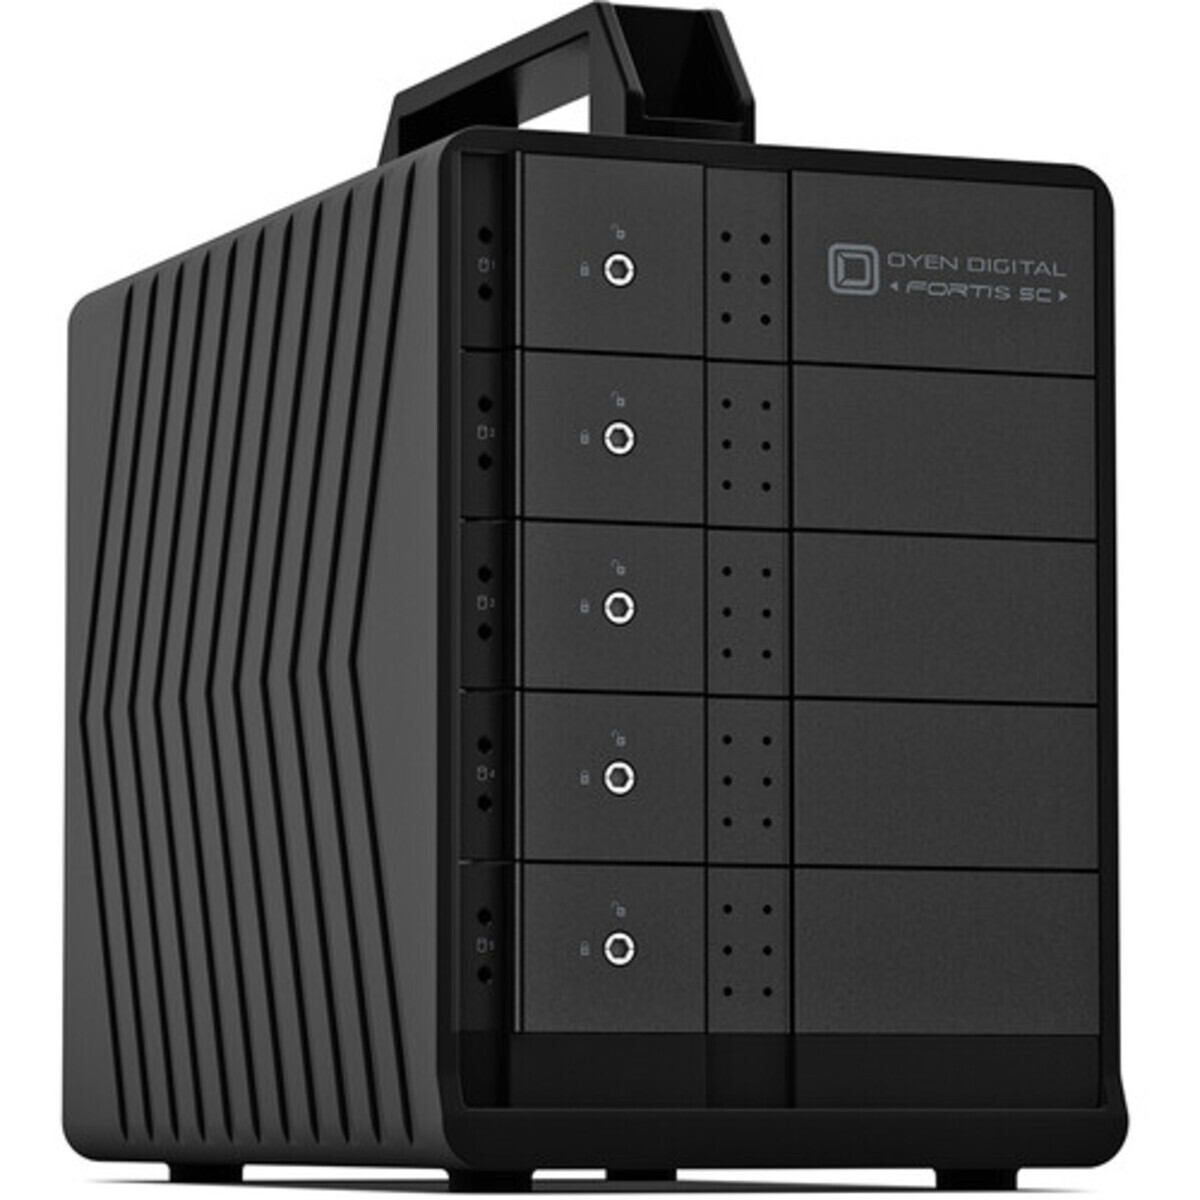 buy OYEN Fortis 5C 110tb Desktop DAS - Direct Attached Storage Device 5x22000gb Western Digital Red Pro WD221KFGX 3.5 7200rpm SATA 6Gb/s HDD NAS Class Drives Installed - Burn-In Tested - nas headquarters buy network attached storage server device das new raid-5 free shipping simply usa christmas holiday black friday cyber monday week sale happening now! Fortis 5C